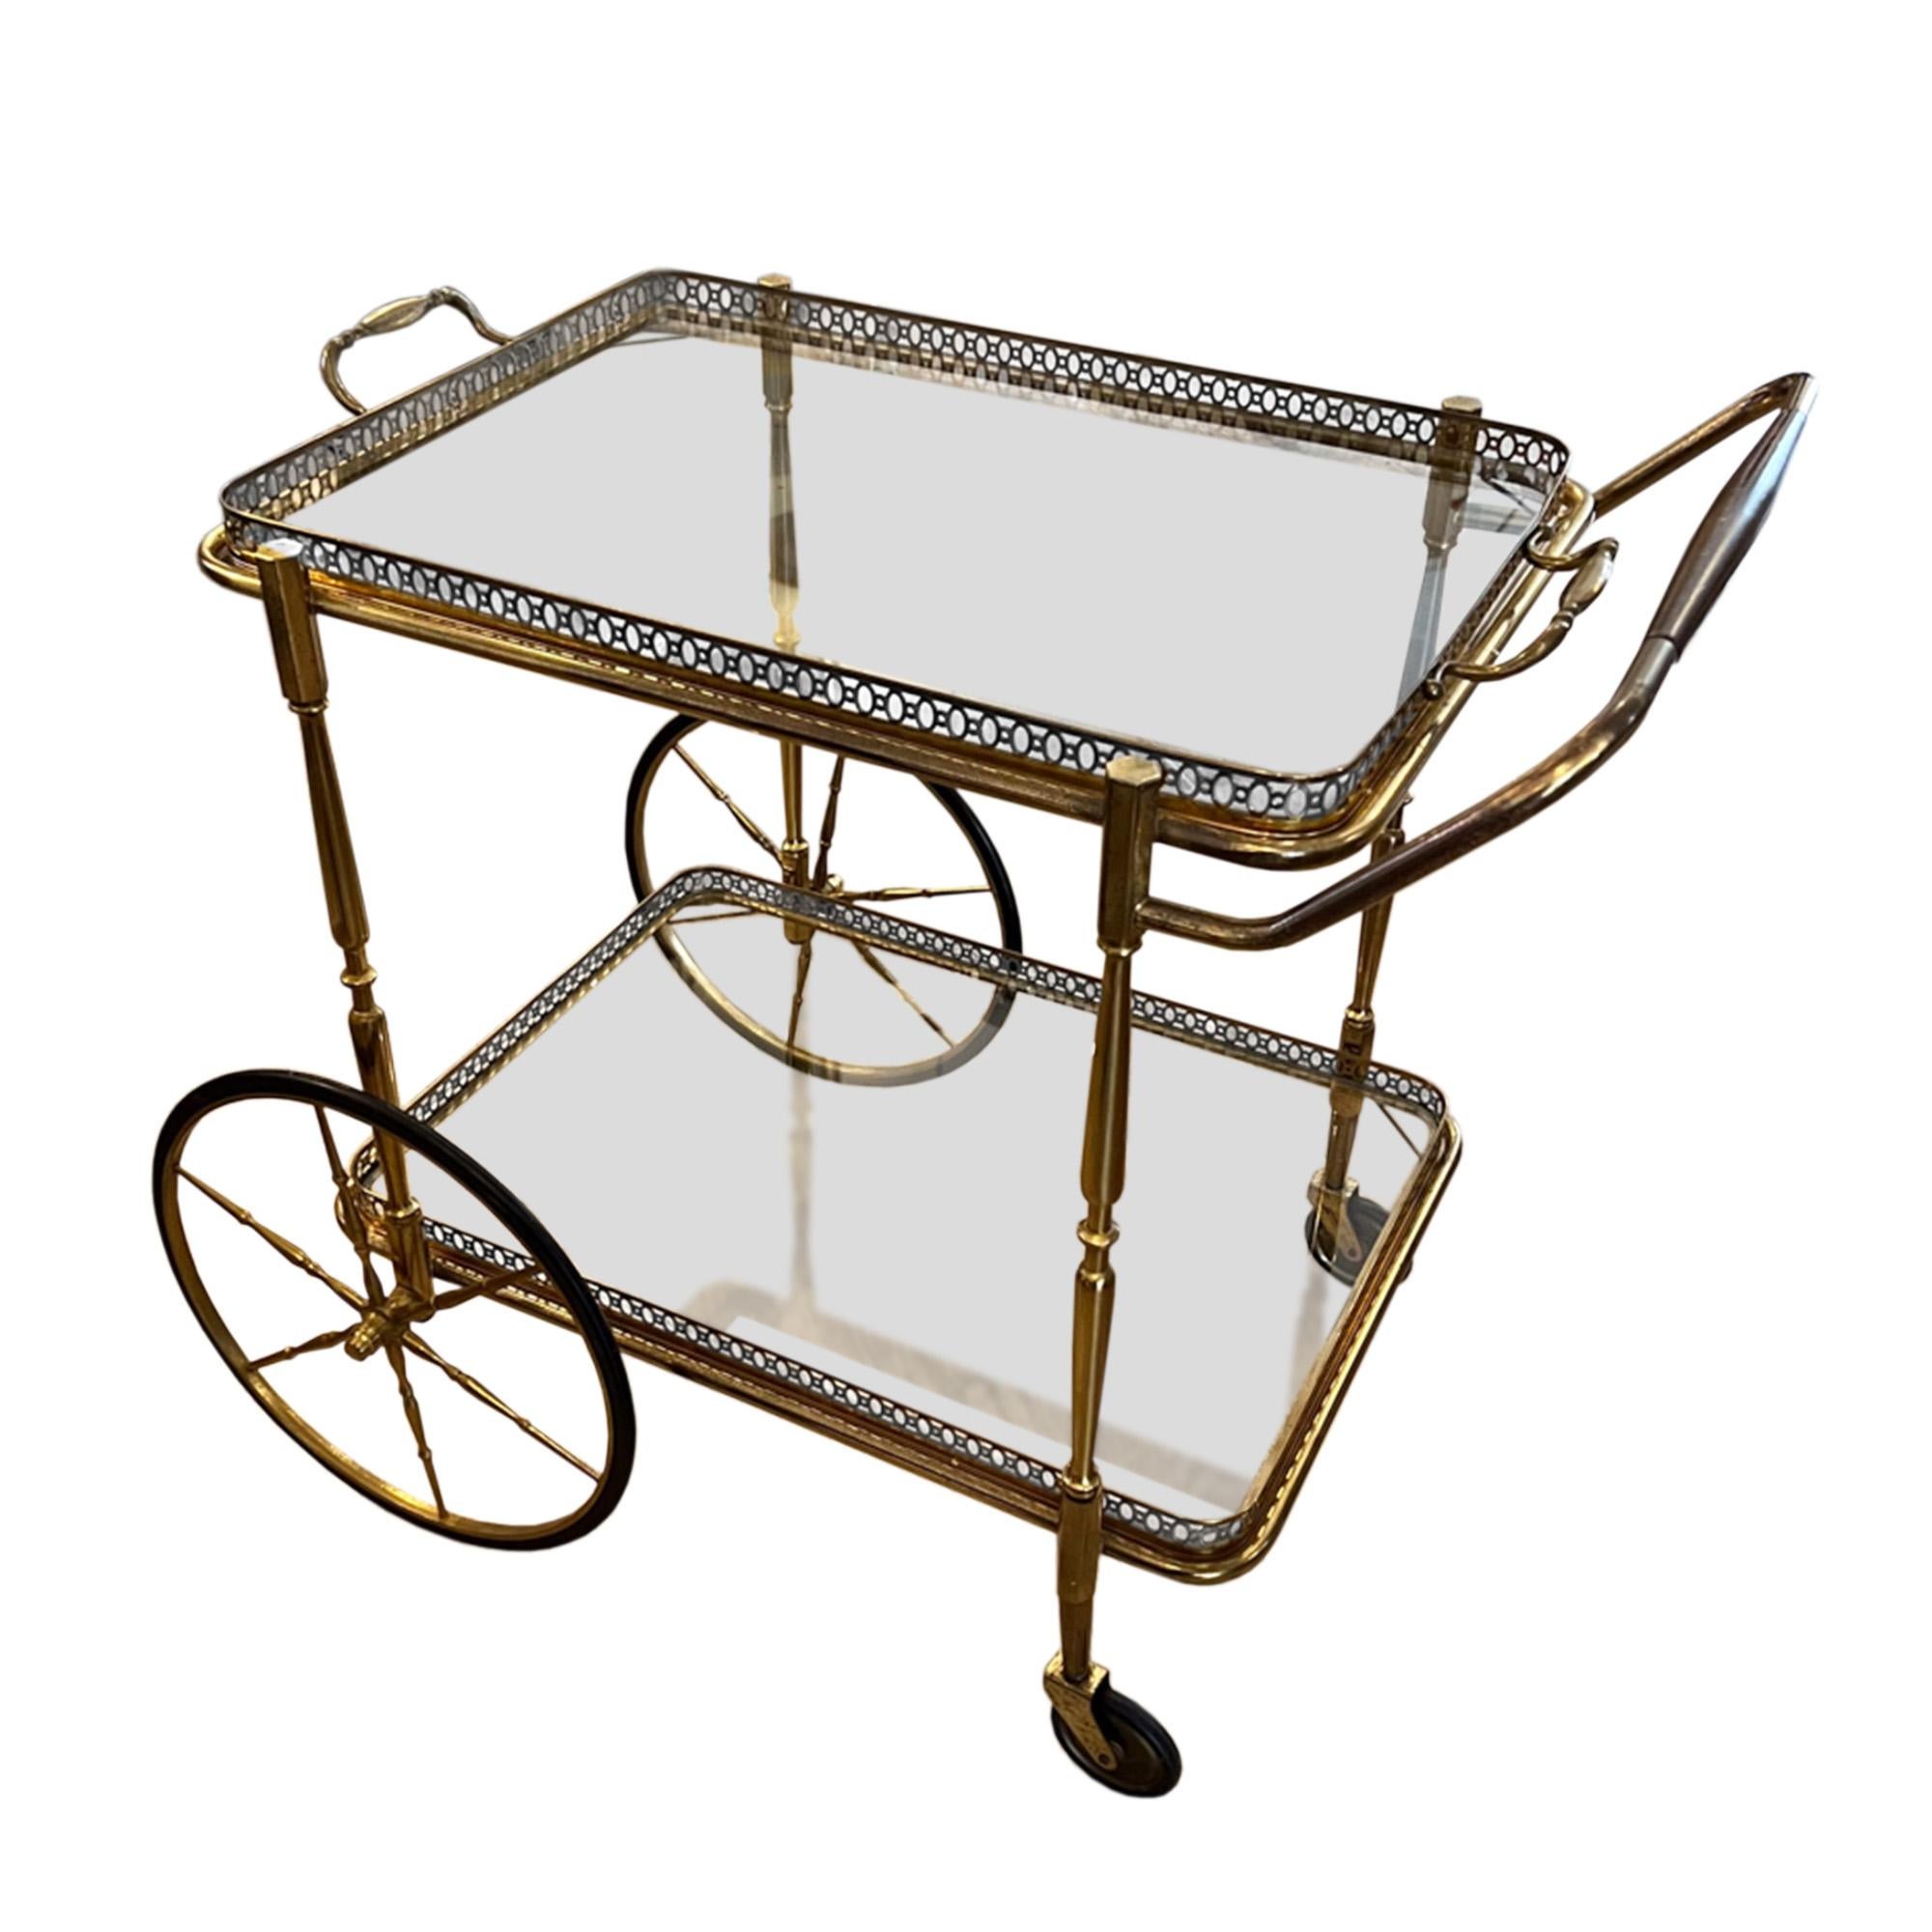 This delightful small drinks trolley was made in France in the 1960s.

Decorative brass frame with detailed, pierced galleries on both shelves. The top tray lifts off with brass handles to be used separately and the wheels work perfectly too. 

You